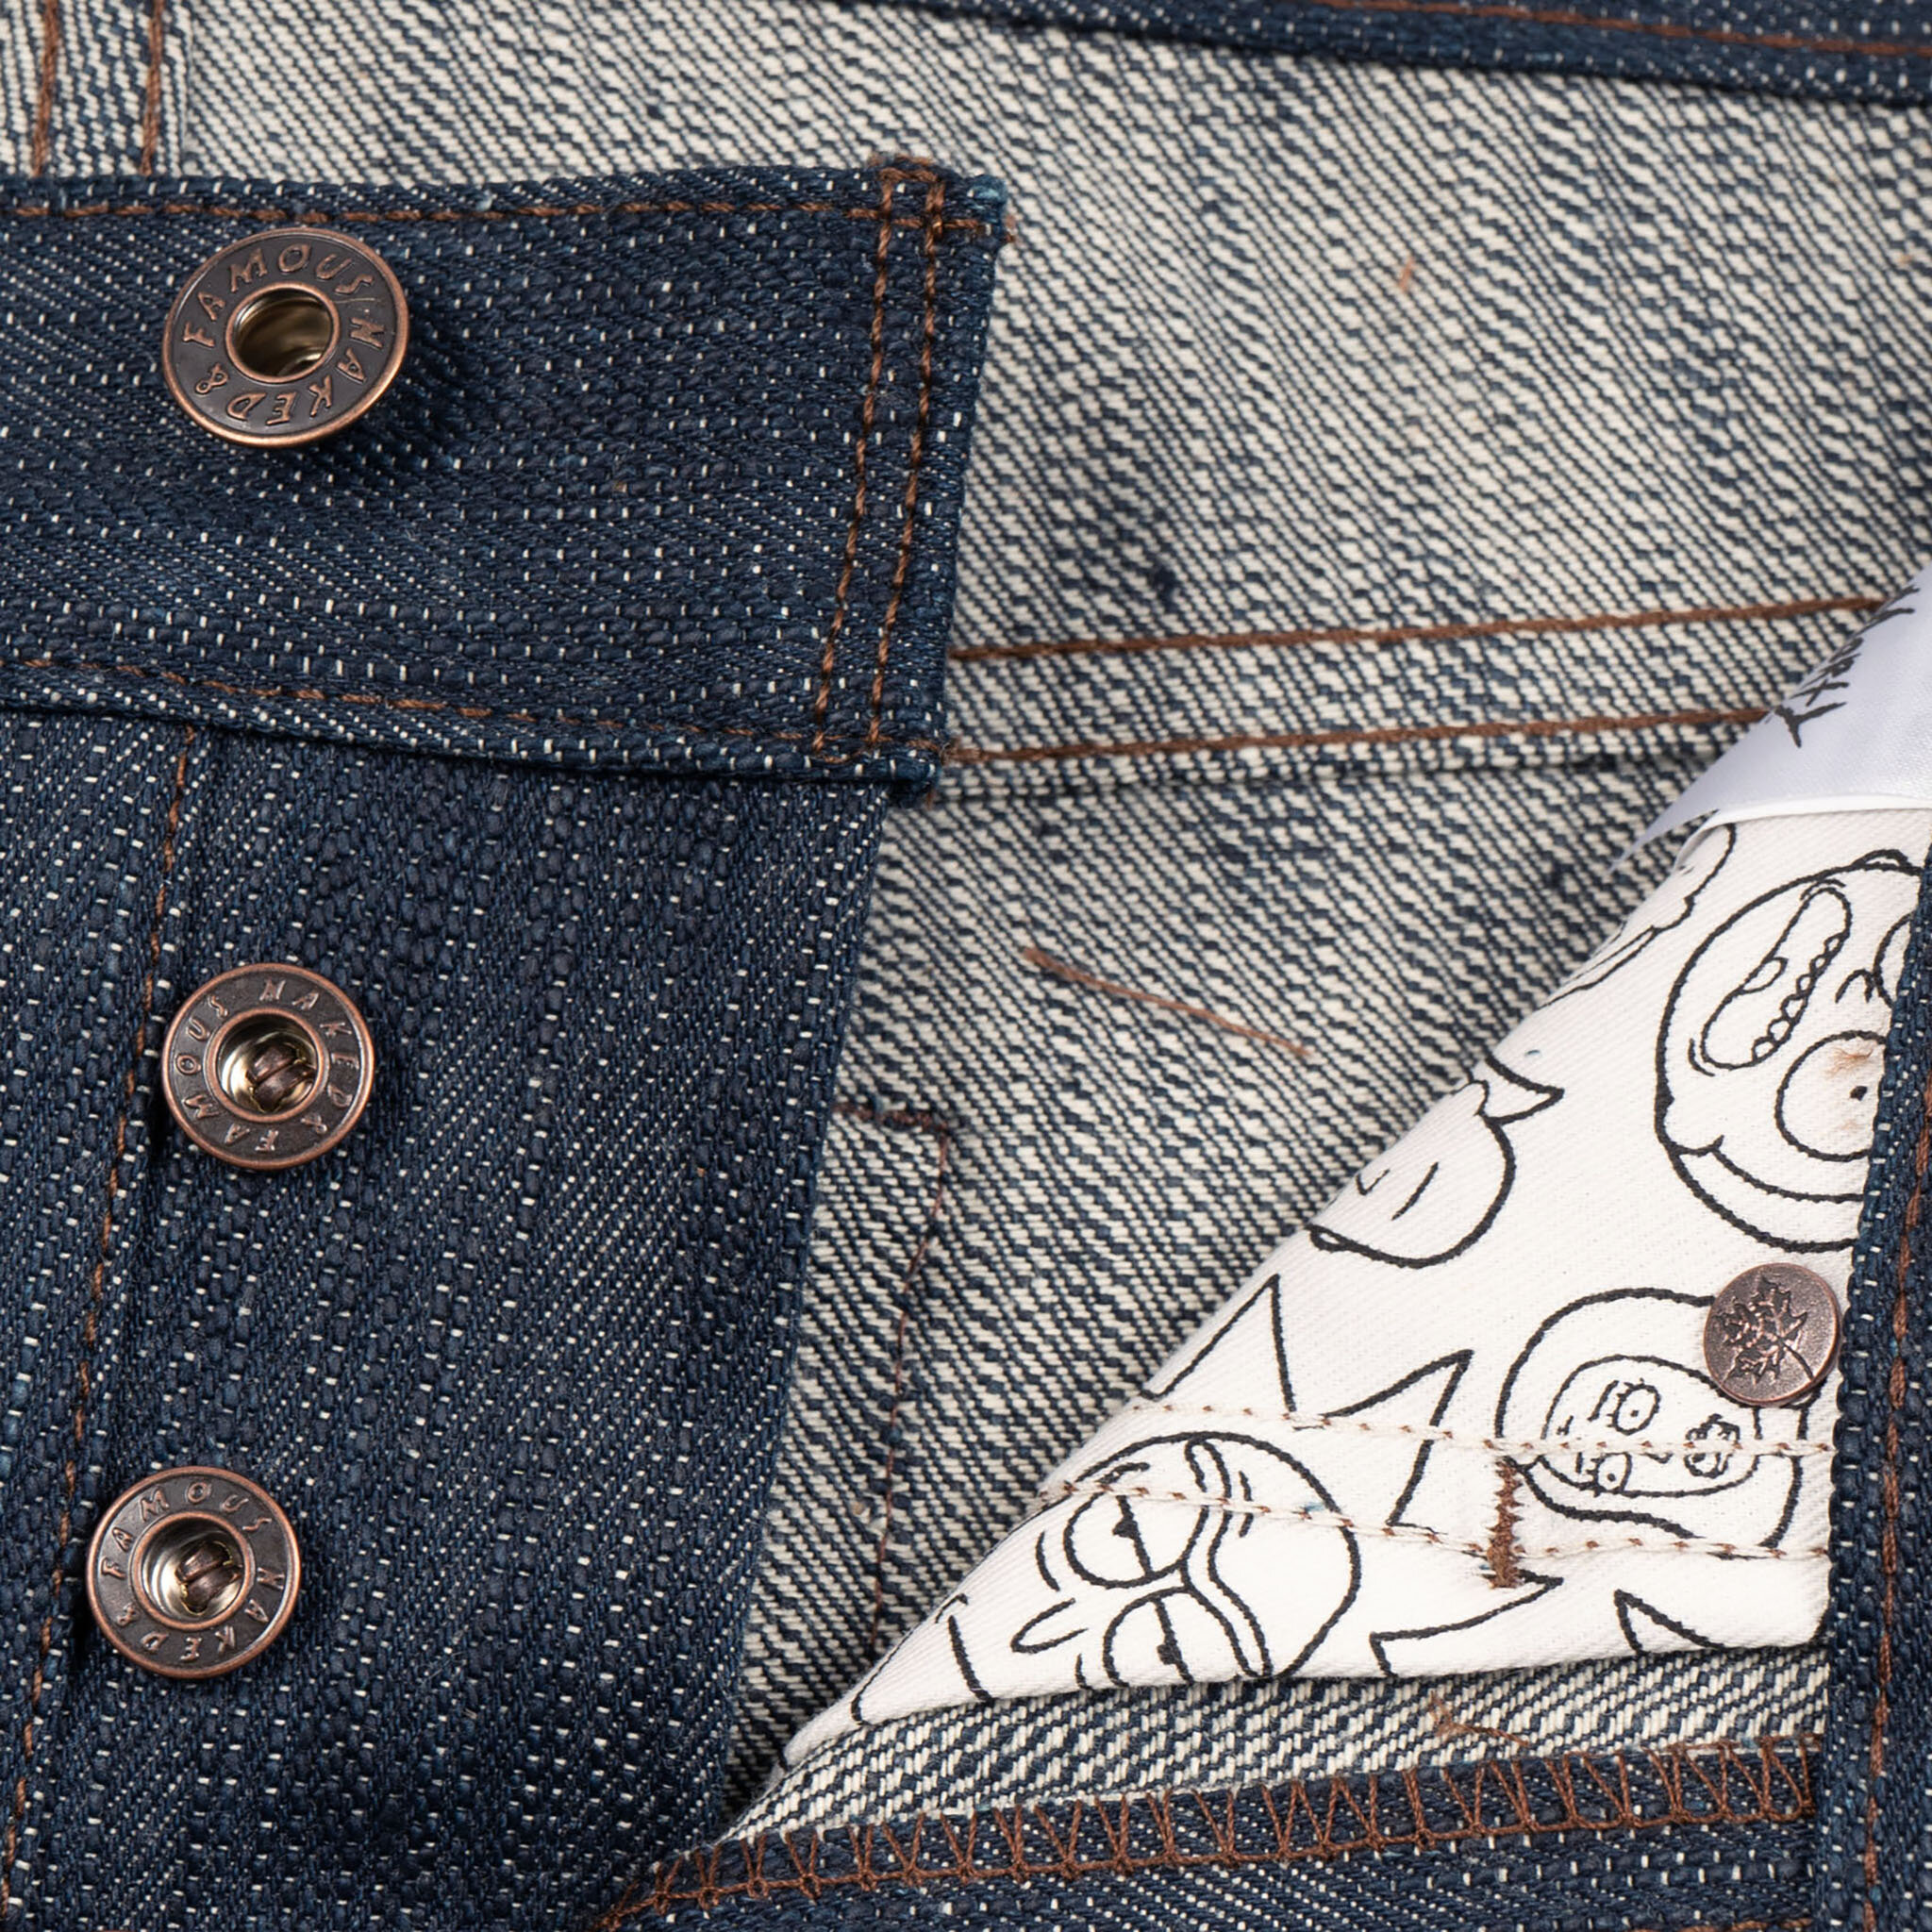  Picckle Rick “Solenya” Selvedge jeans - button fly 